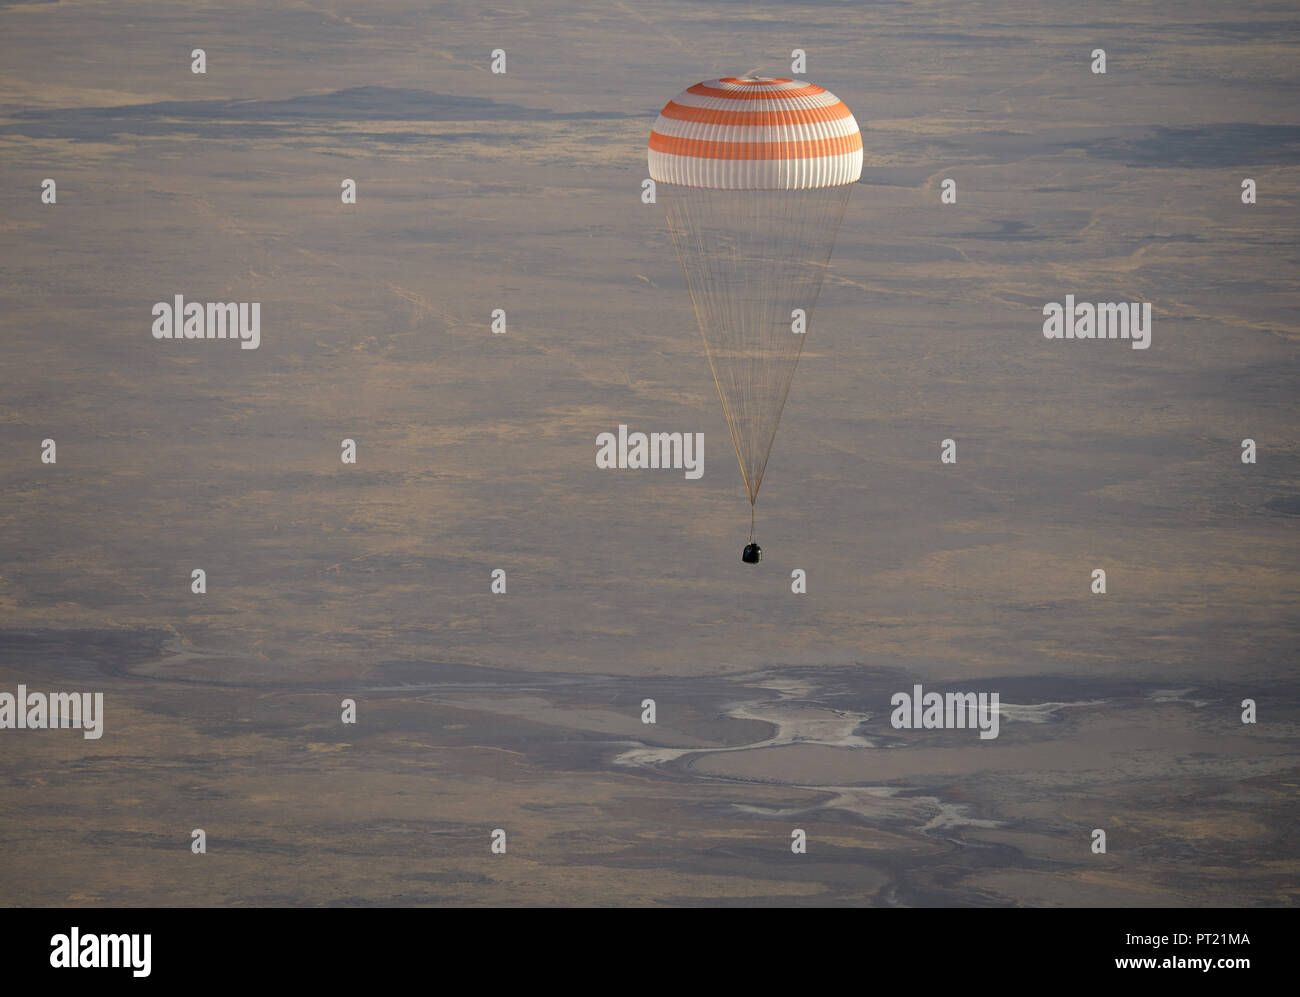 Zhezkazgan, Kazakhstan. 04th Oct, 2018. The Russian Soyuz MS-08 spacecraft drifts down to Earth with the International Space Station Expedition 56 crew October 4, 2018 near Zhezkazgan, Kazakhstan. American astronauts Drew Feustel and Ricky Arnold of NASA, along with Russian Soyuz Commander Oleg Artemyev are returning after 197 days in space. Credit: Planetpix/Alamy Live News Stock Photo